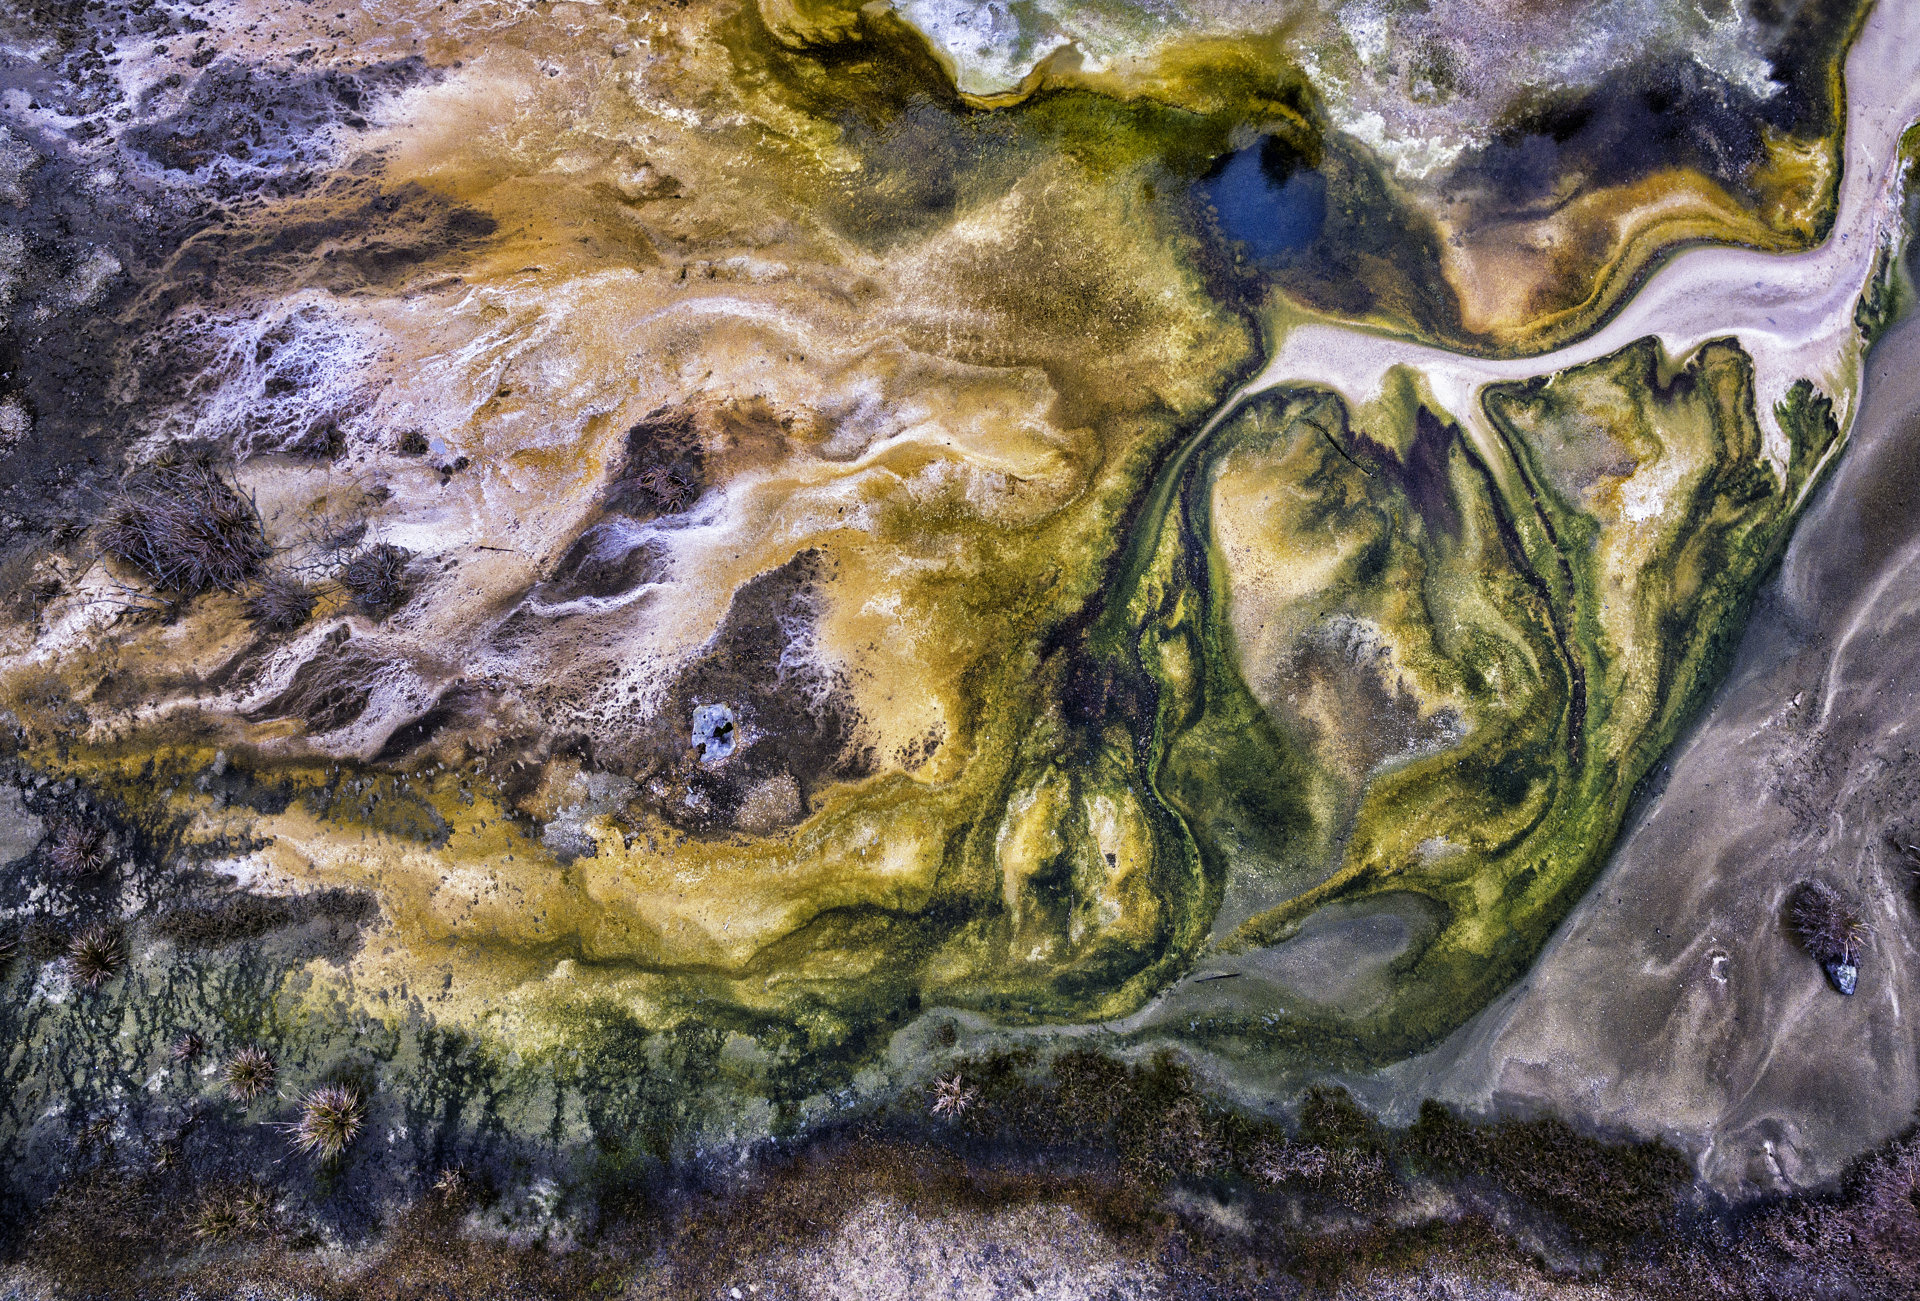 Algae and geo-thermal landscape at the Volcanic Valley near Rororua, New Zealand.